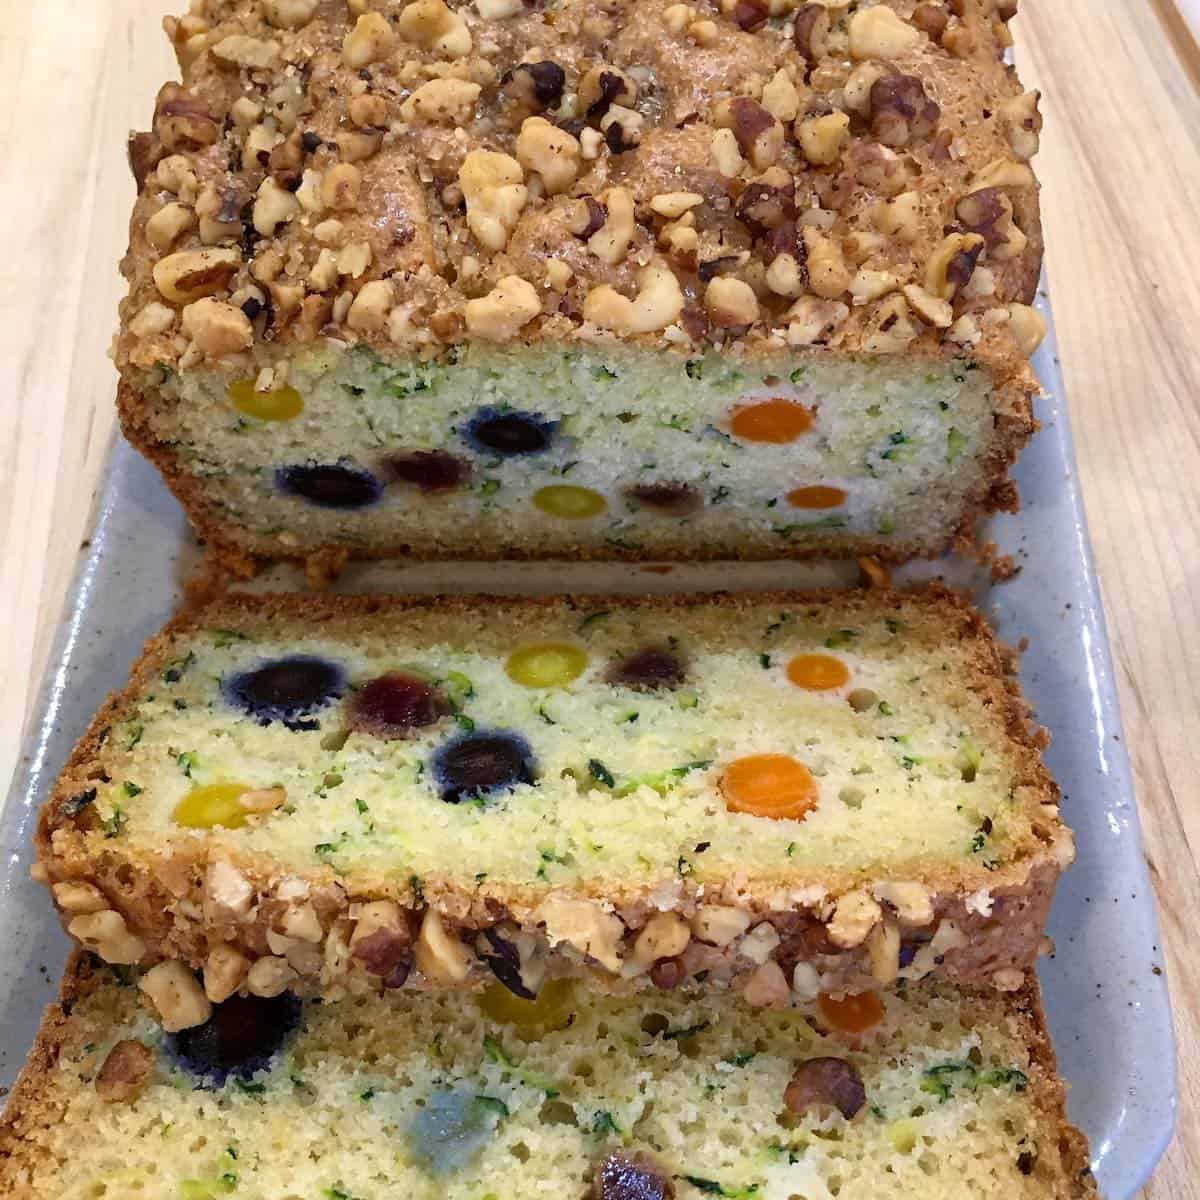 Sliced loaf exposes the pretty vegetables inside the funfetti zucchini bread.